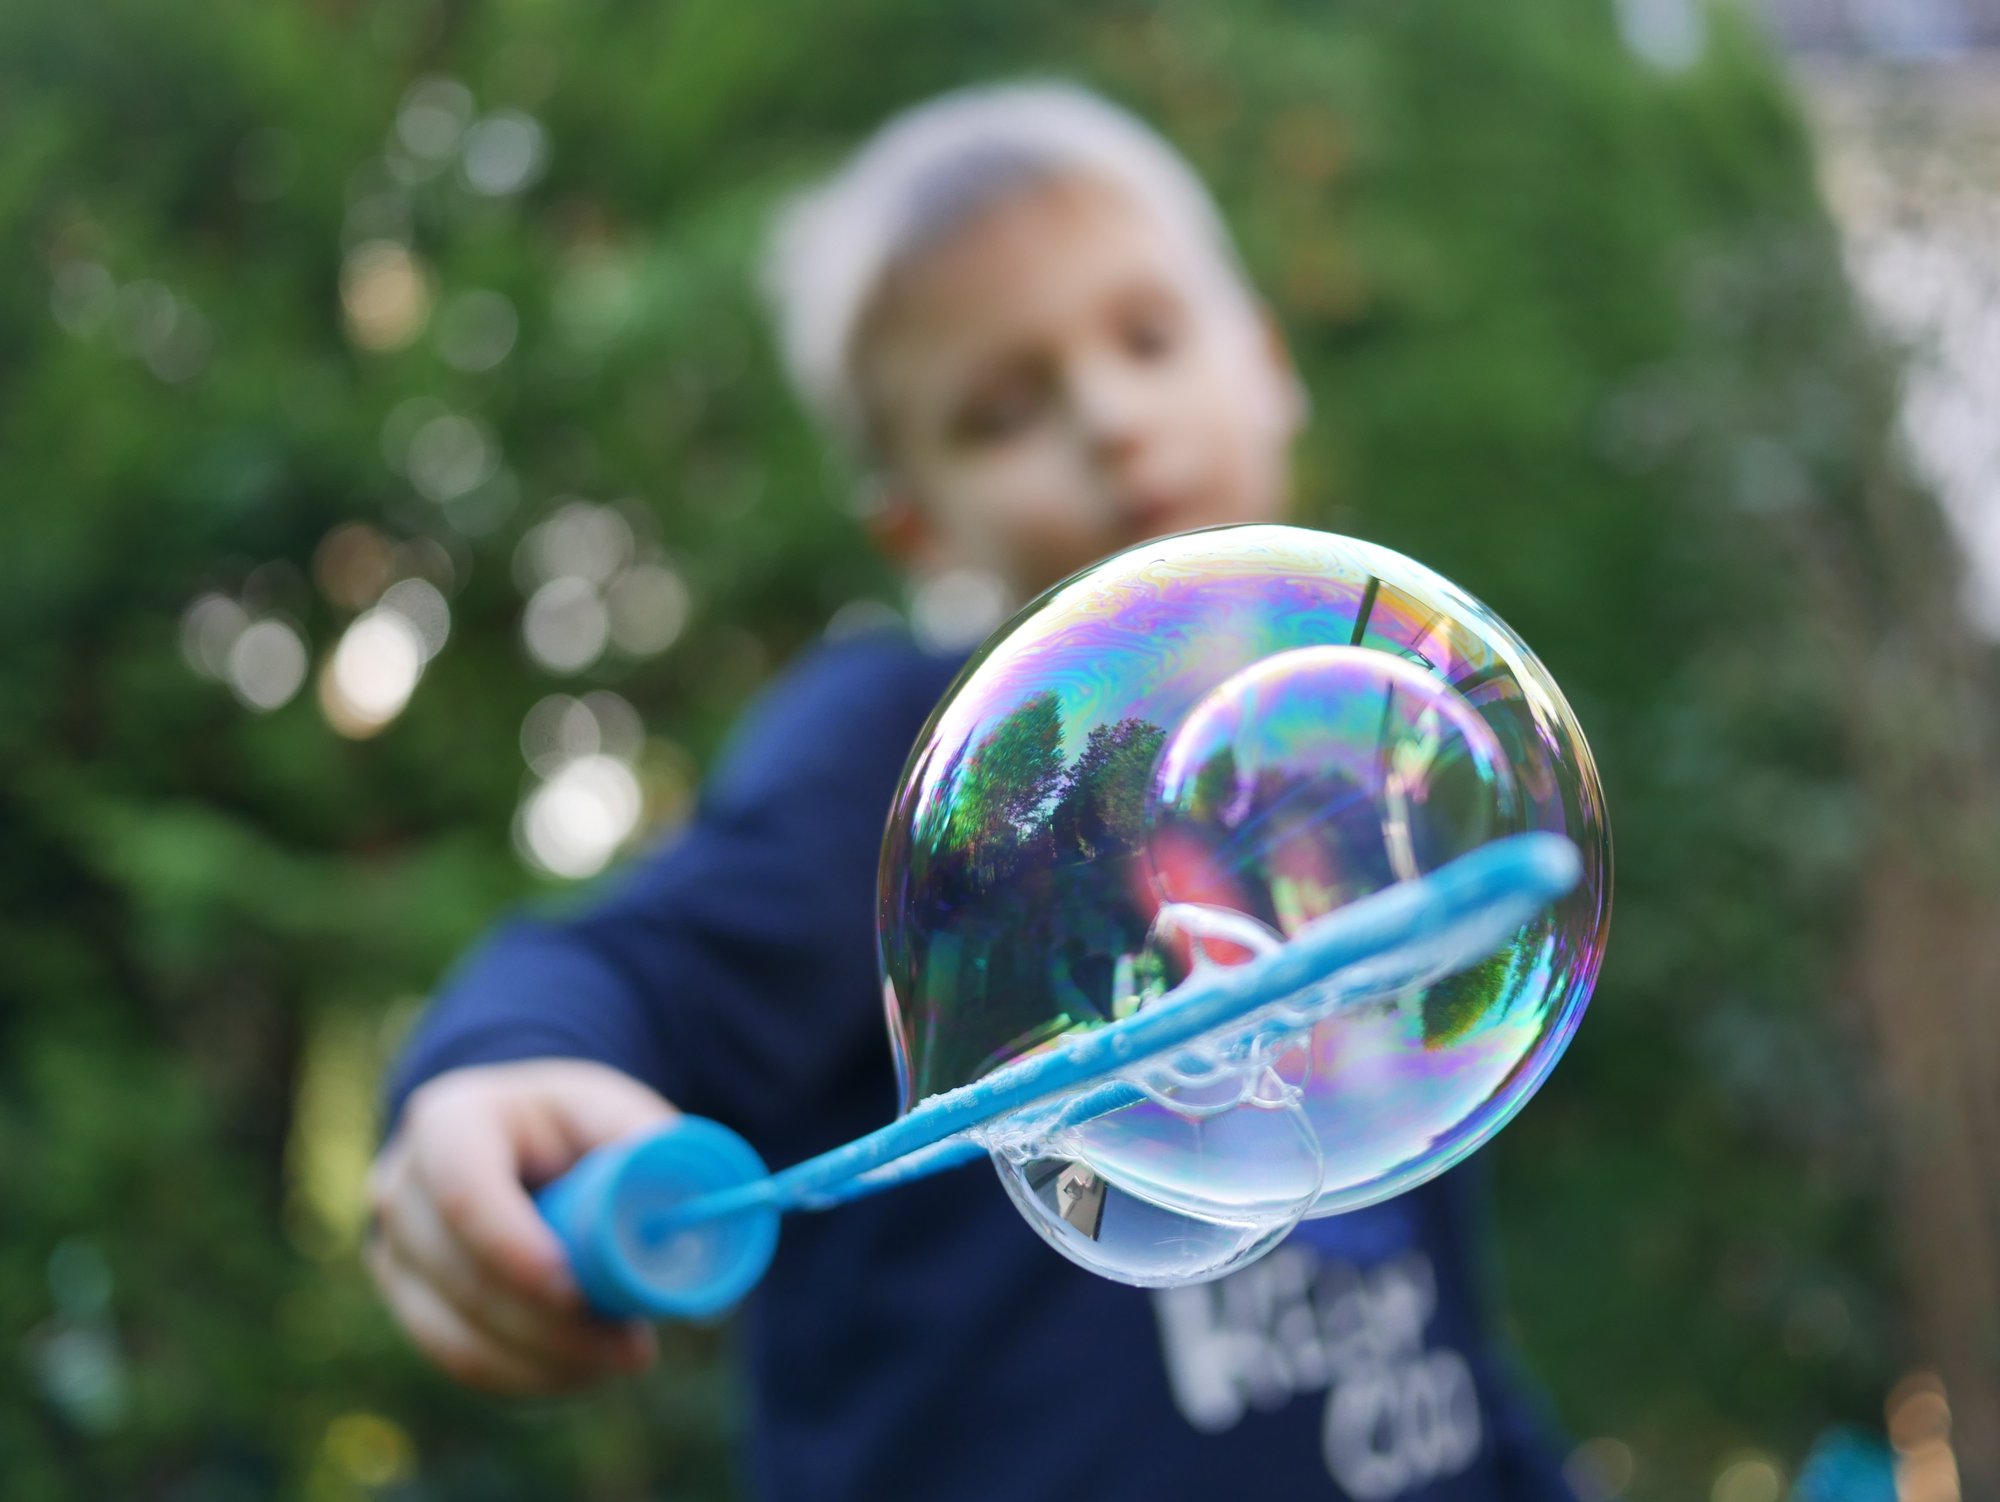 Young boy using a bubble wand